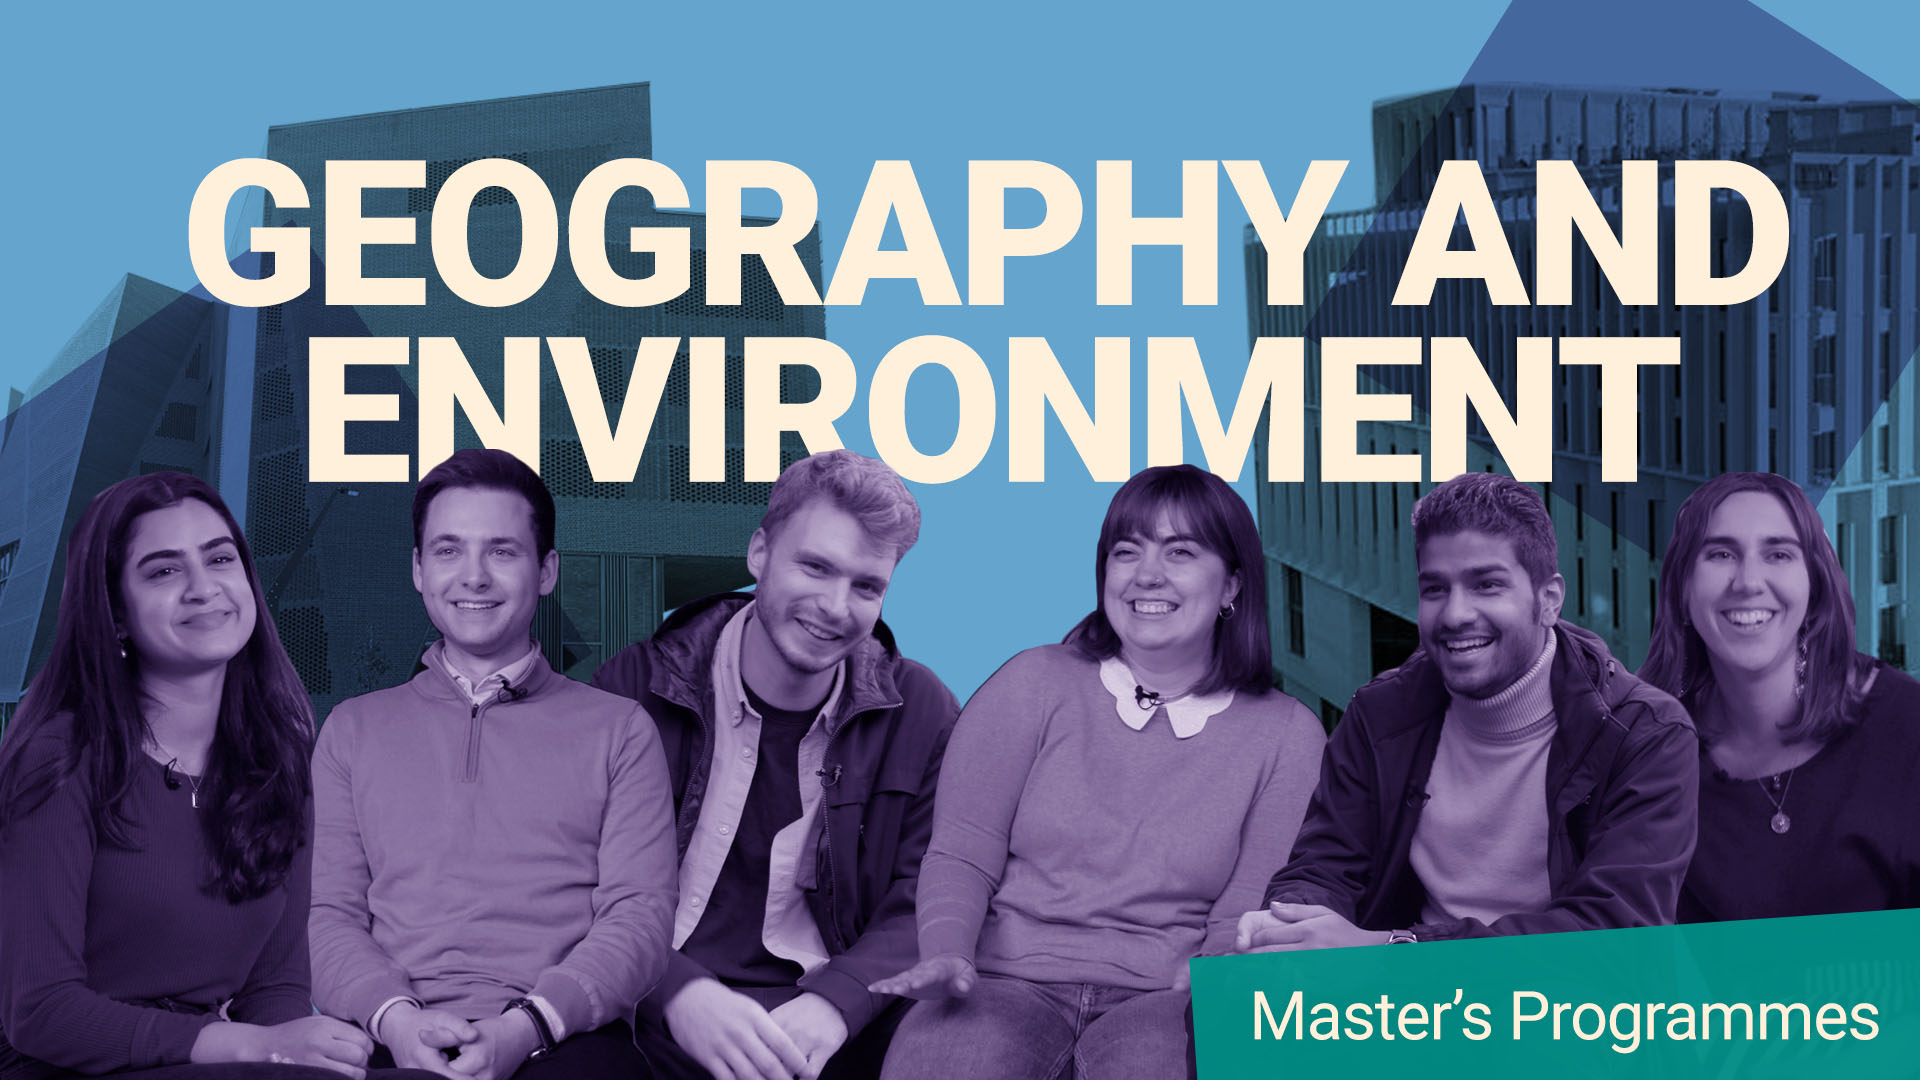 Master's study in Geography at LSE